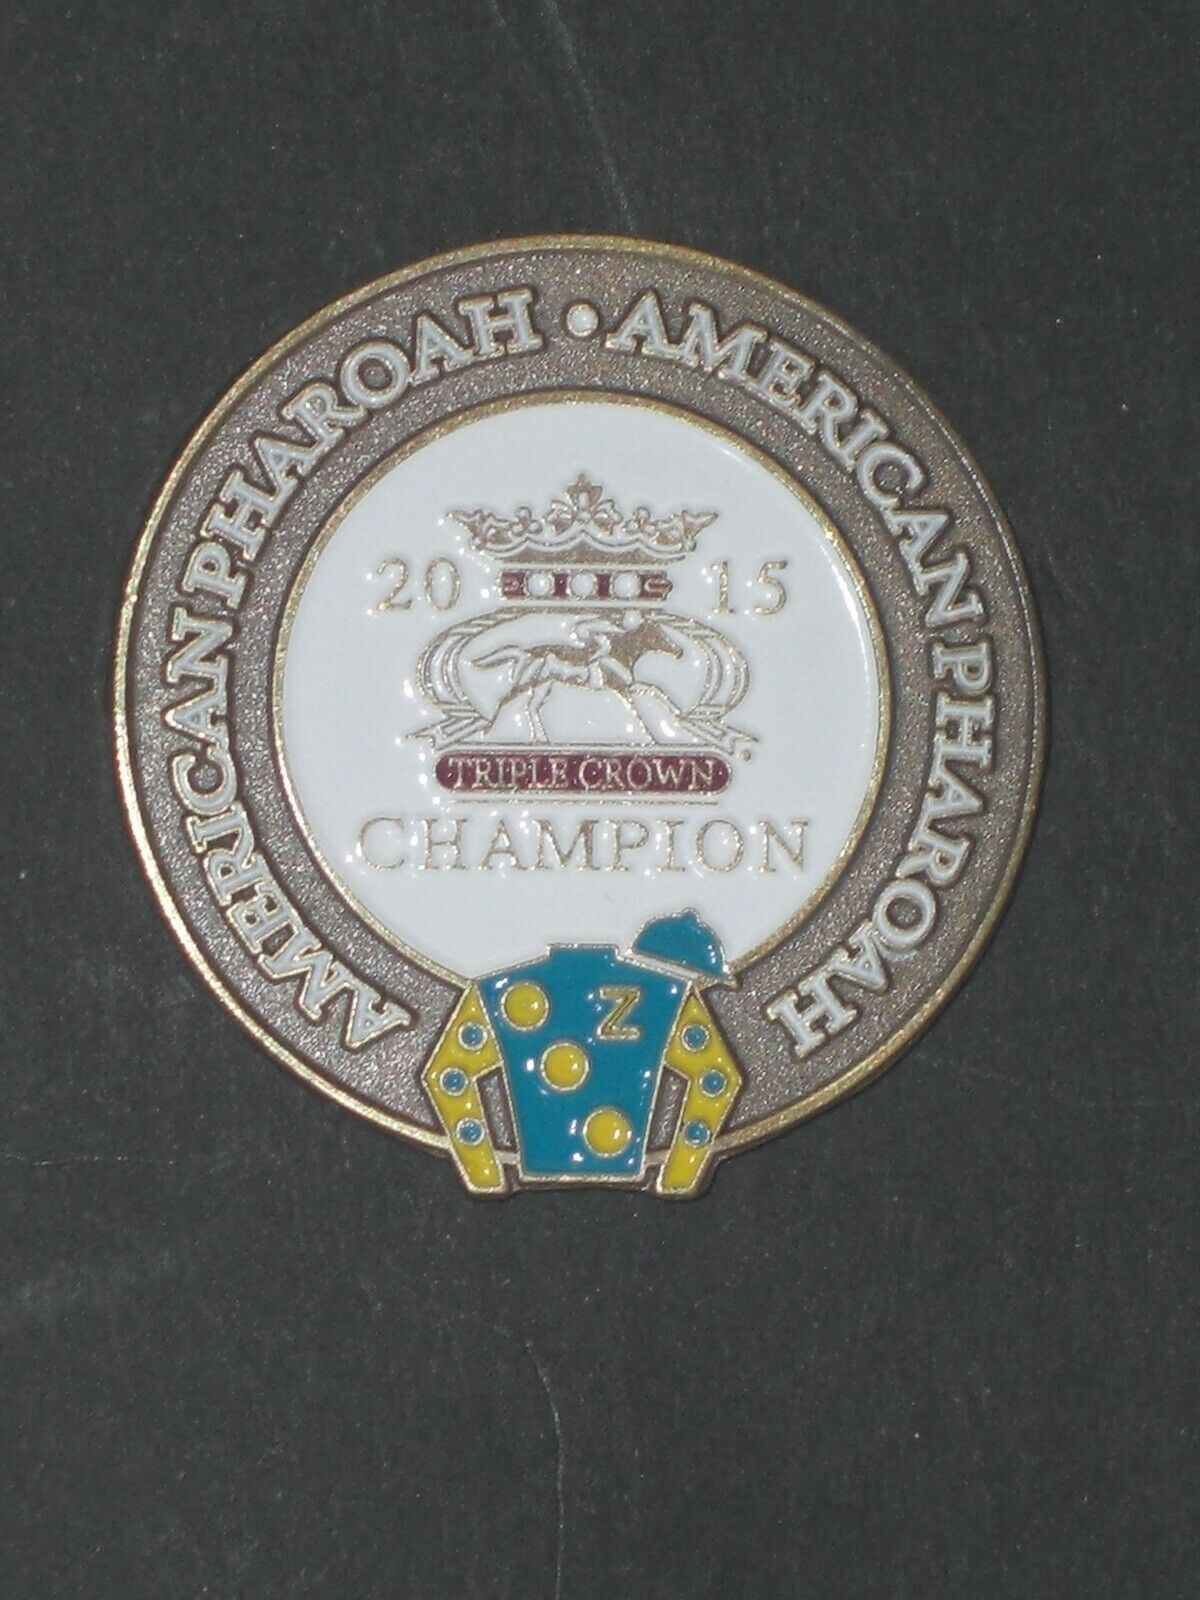 2015 - AMERICAN PHAROAH - Triple Crown Champion Pin - NEW - Only 2015 Made - $15.00